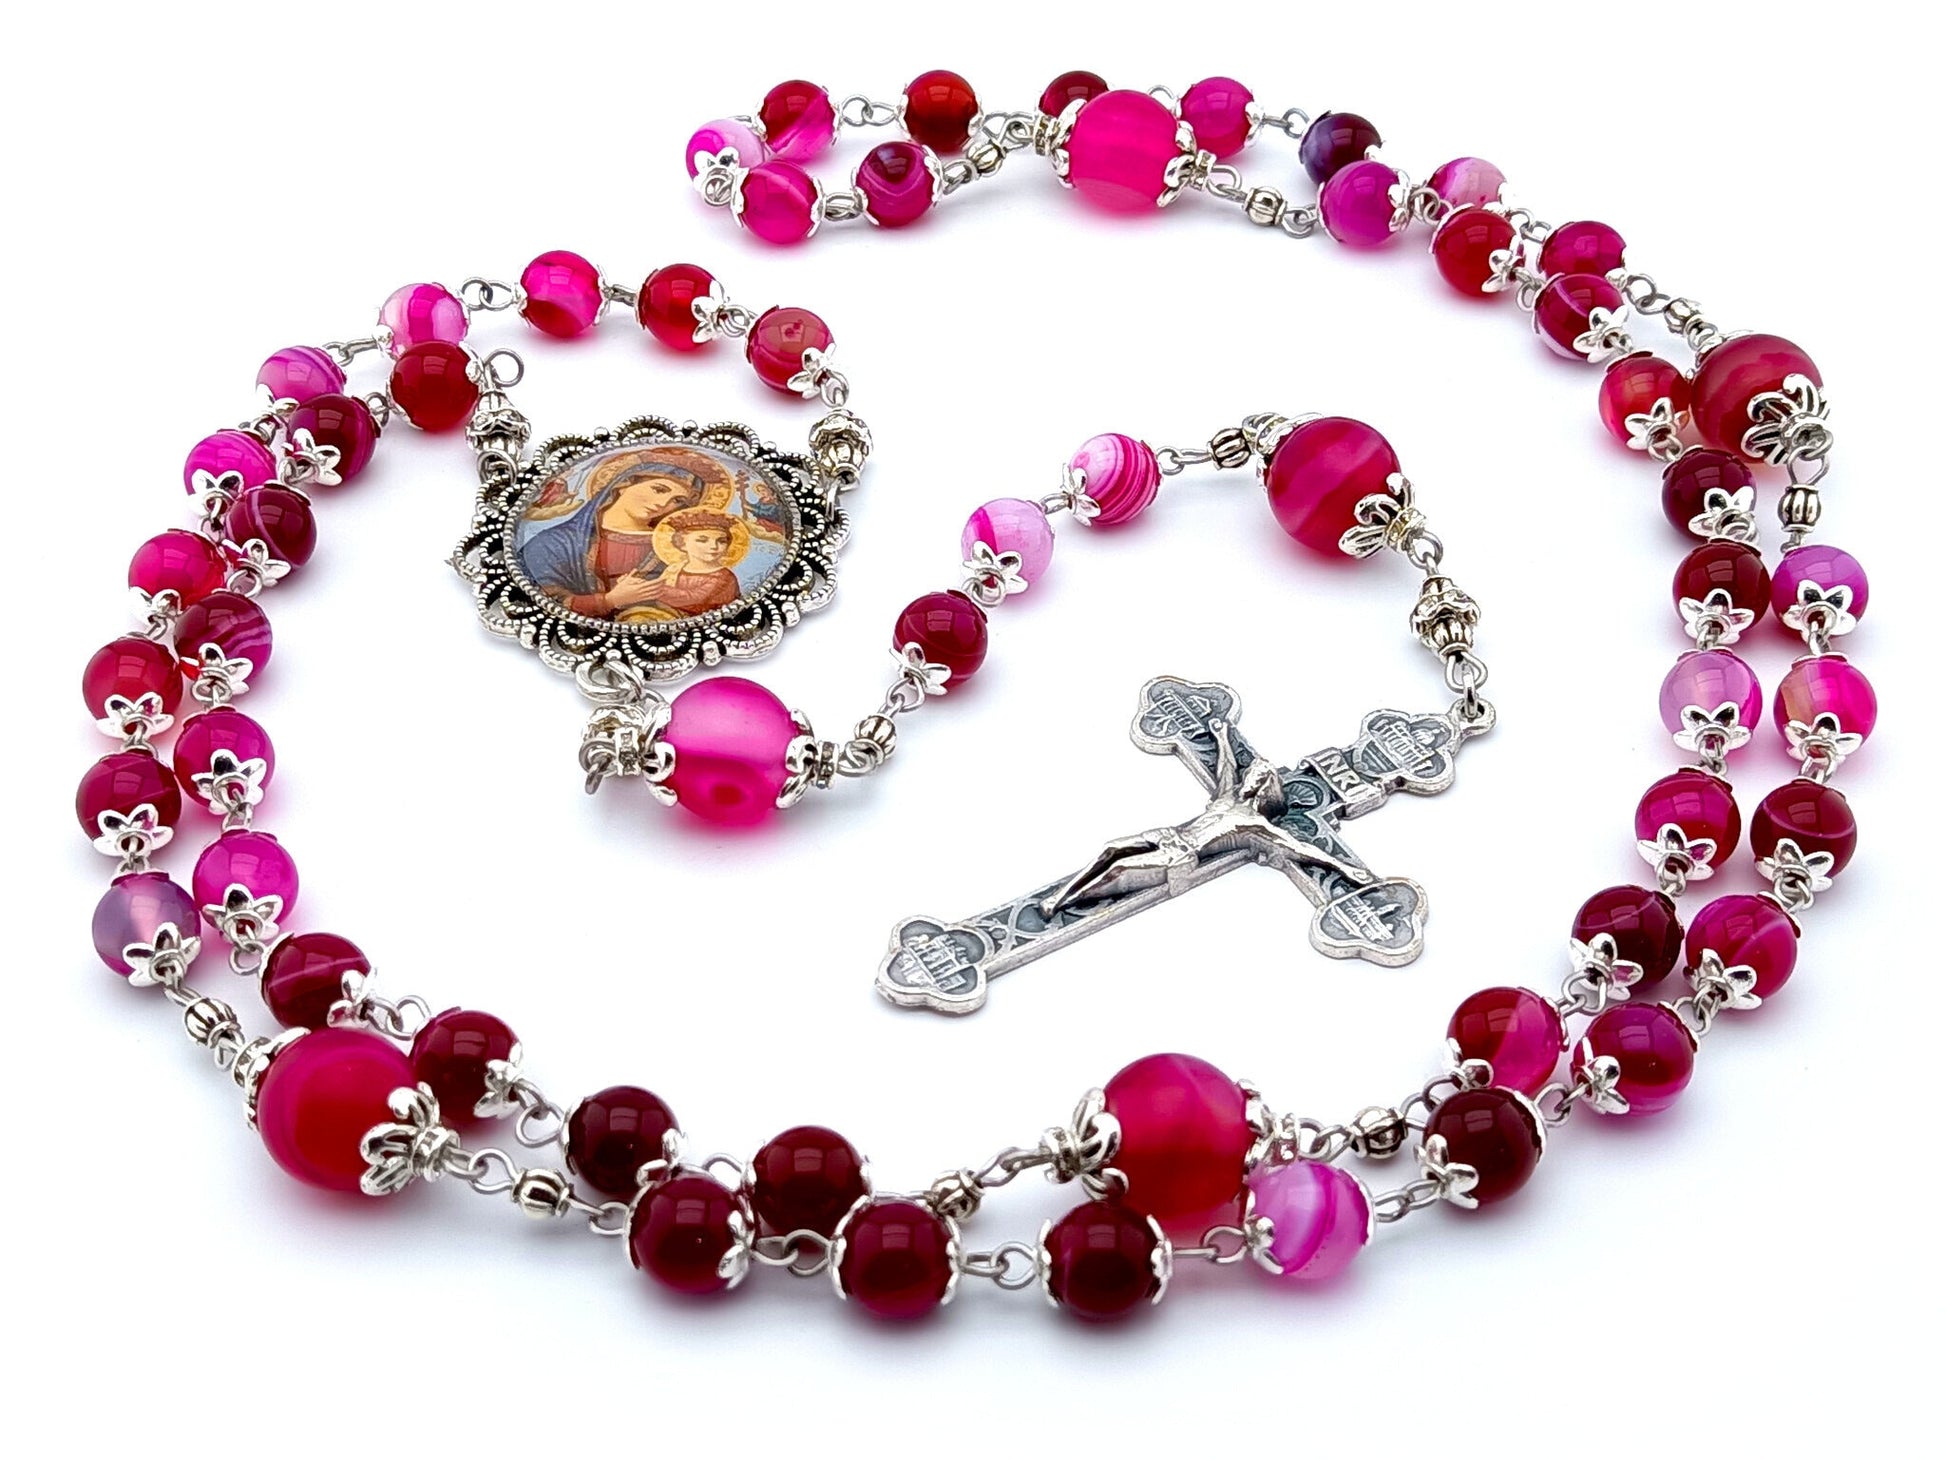 Our Lady of Perpetual Succour unique rosary beads with pink agate gemstone beads, silver crucifix, picture centre medal and accessories.